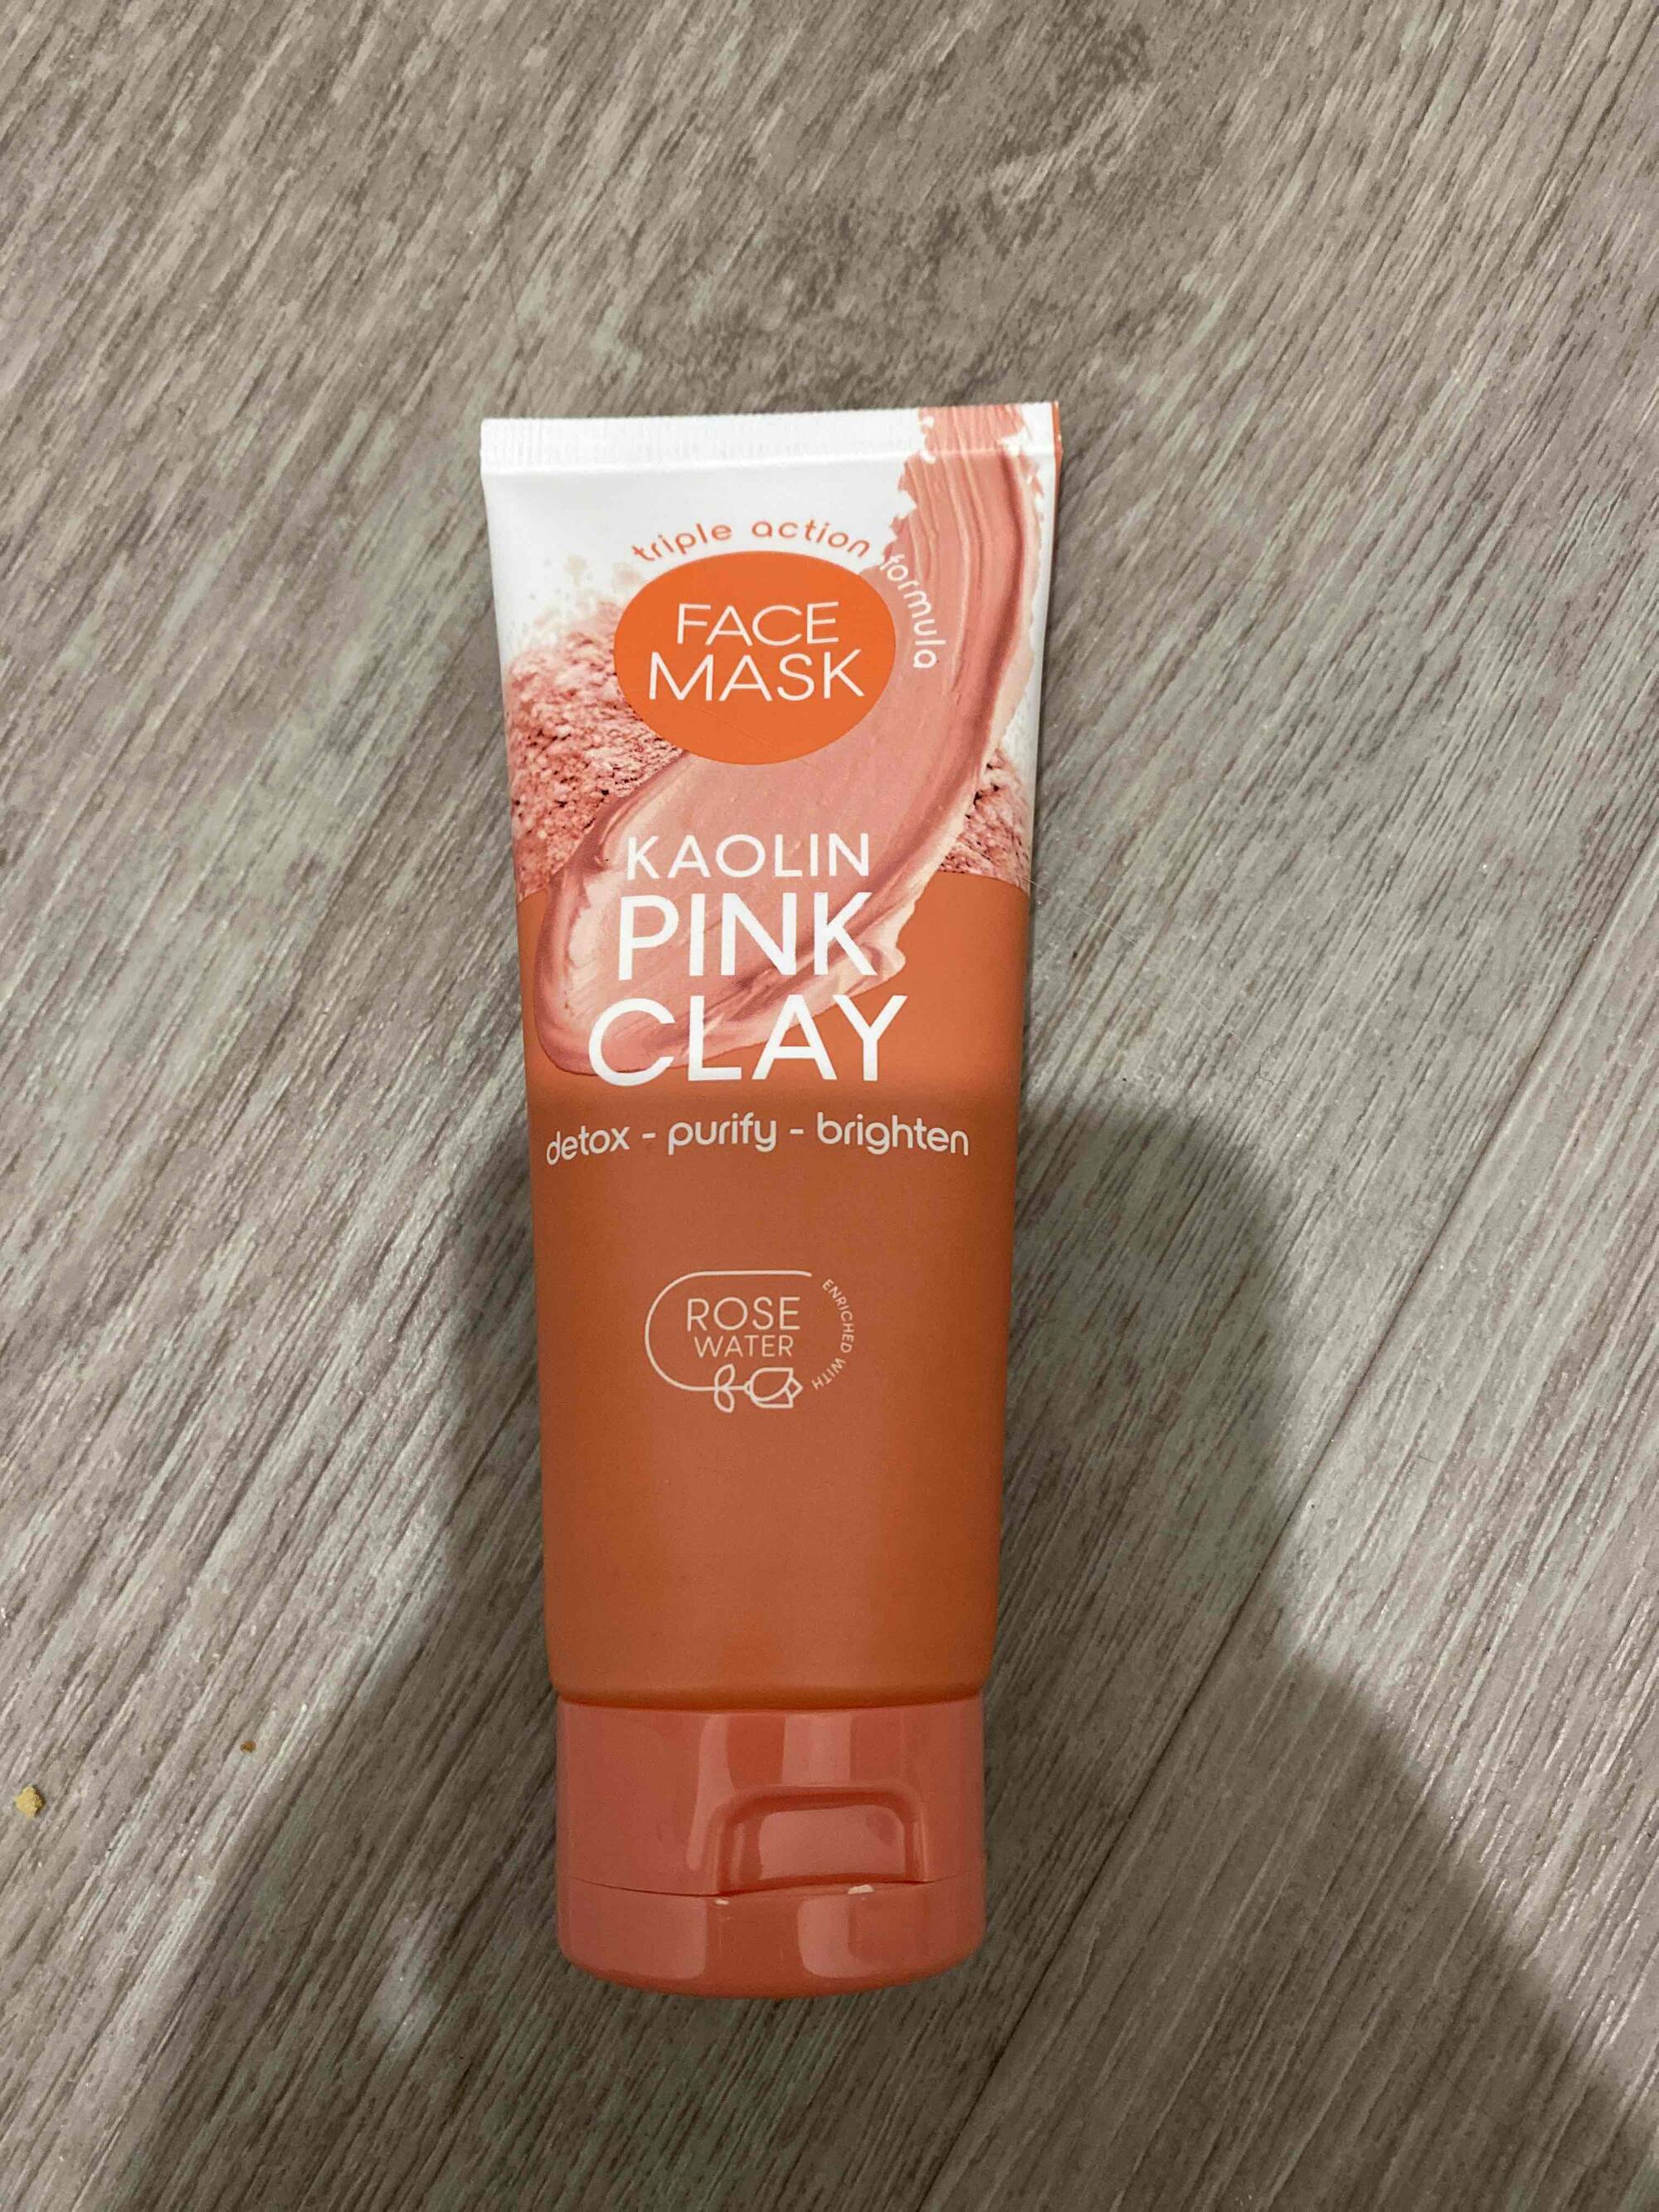 MAXBRANDS - Kaolin pink clay - Face mask rose water